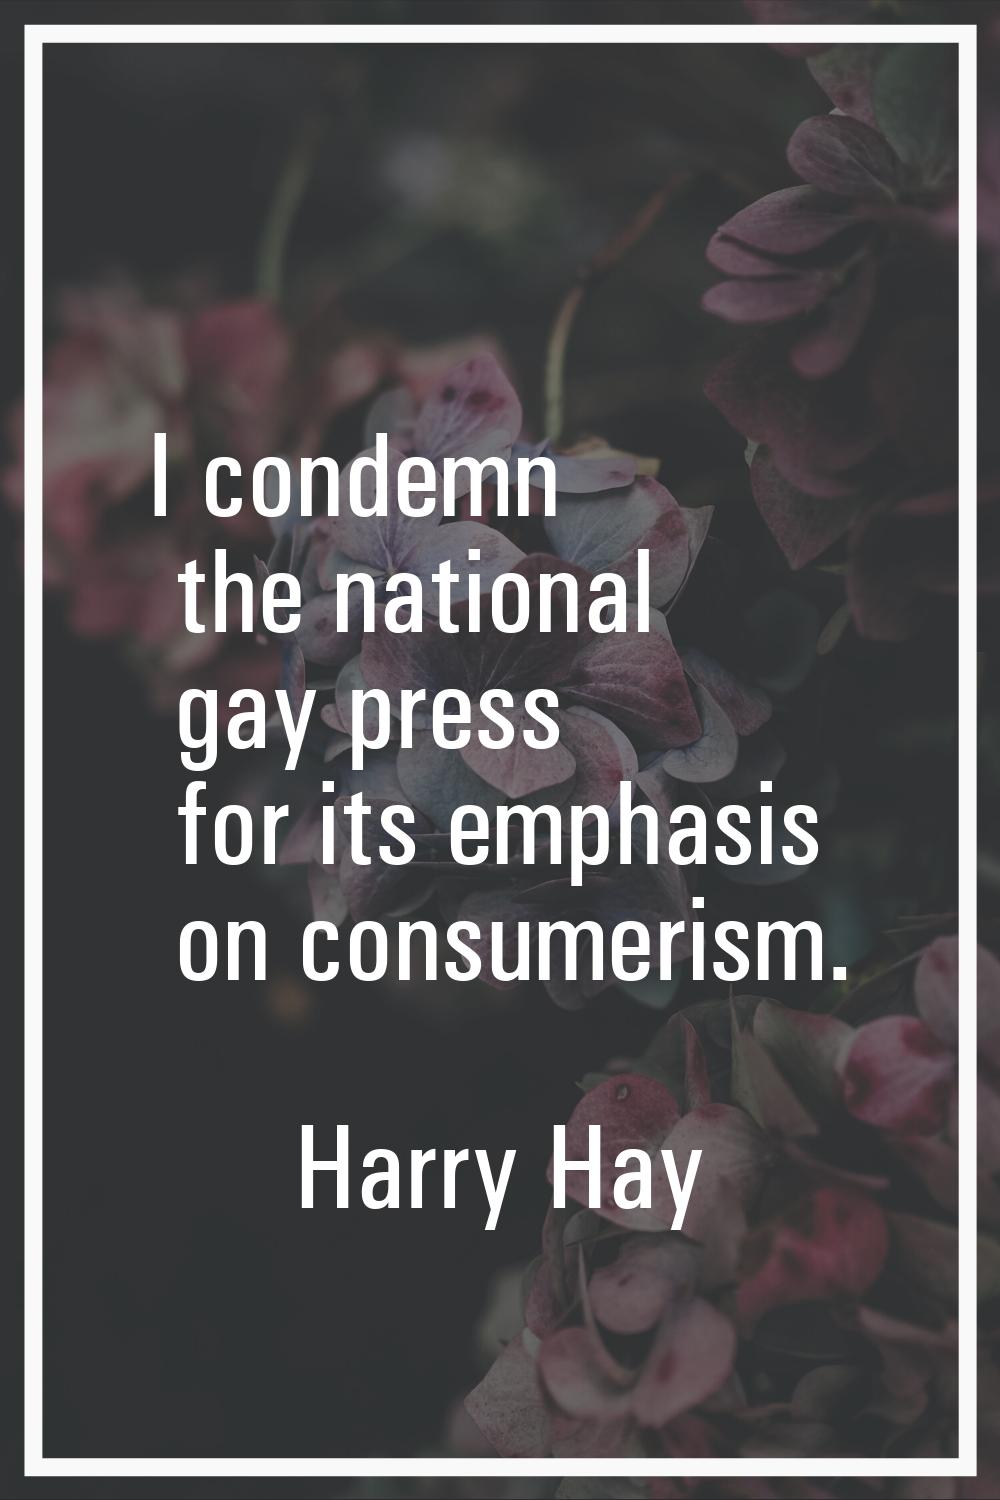 I condemn the national gay press for its emphasis on consumerism.